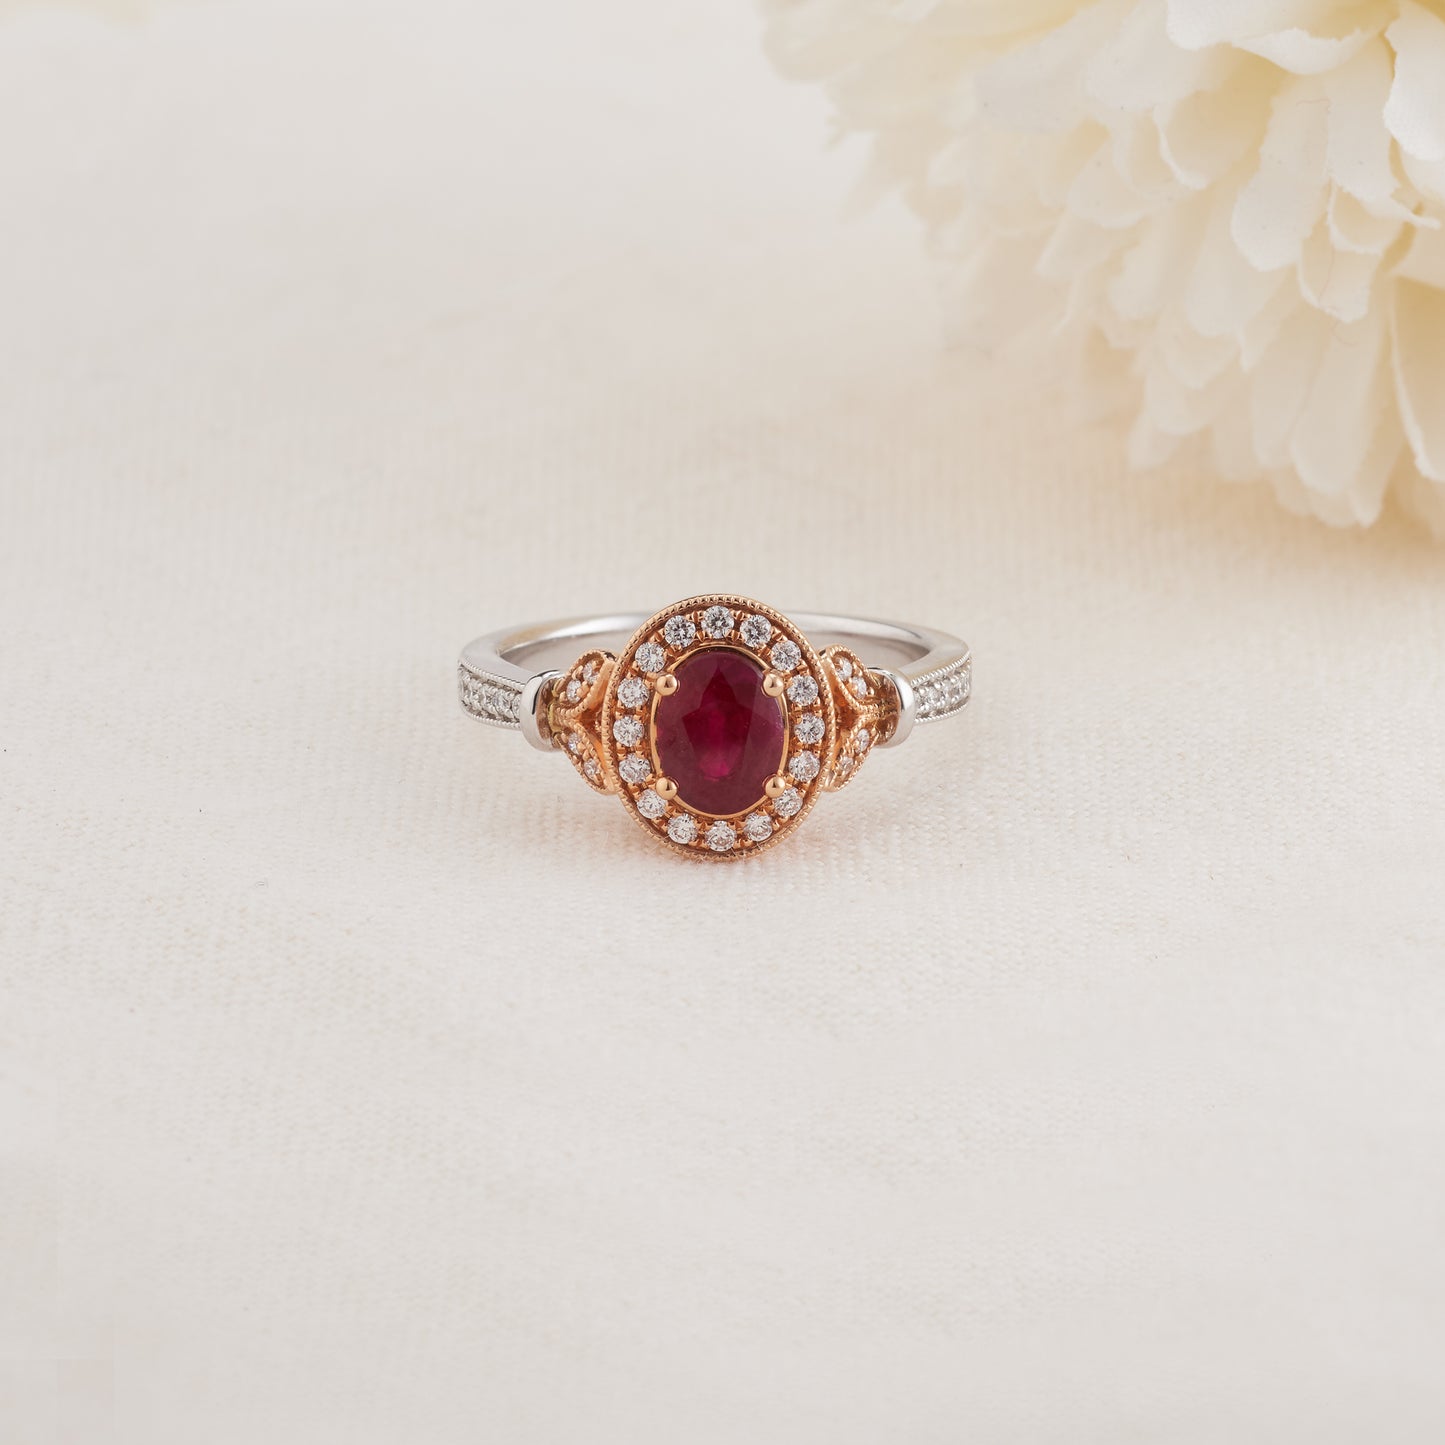 18K White and Rose Gold Oval Ruby Diamond Halo Vintage Inspired Ring 0.25tdw